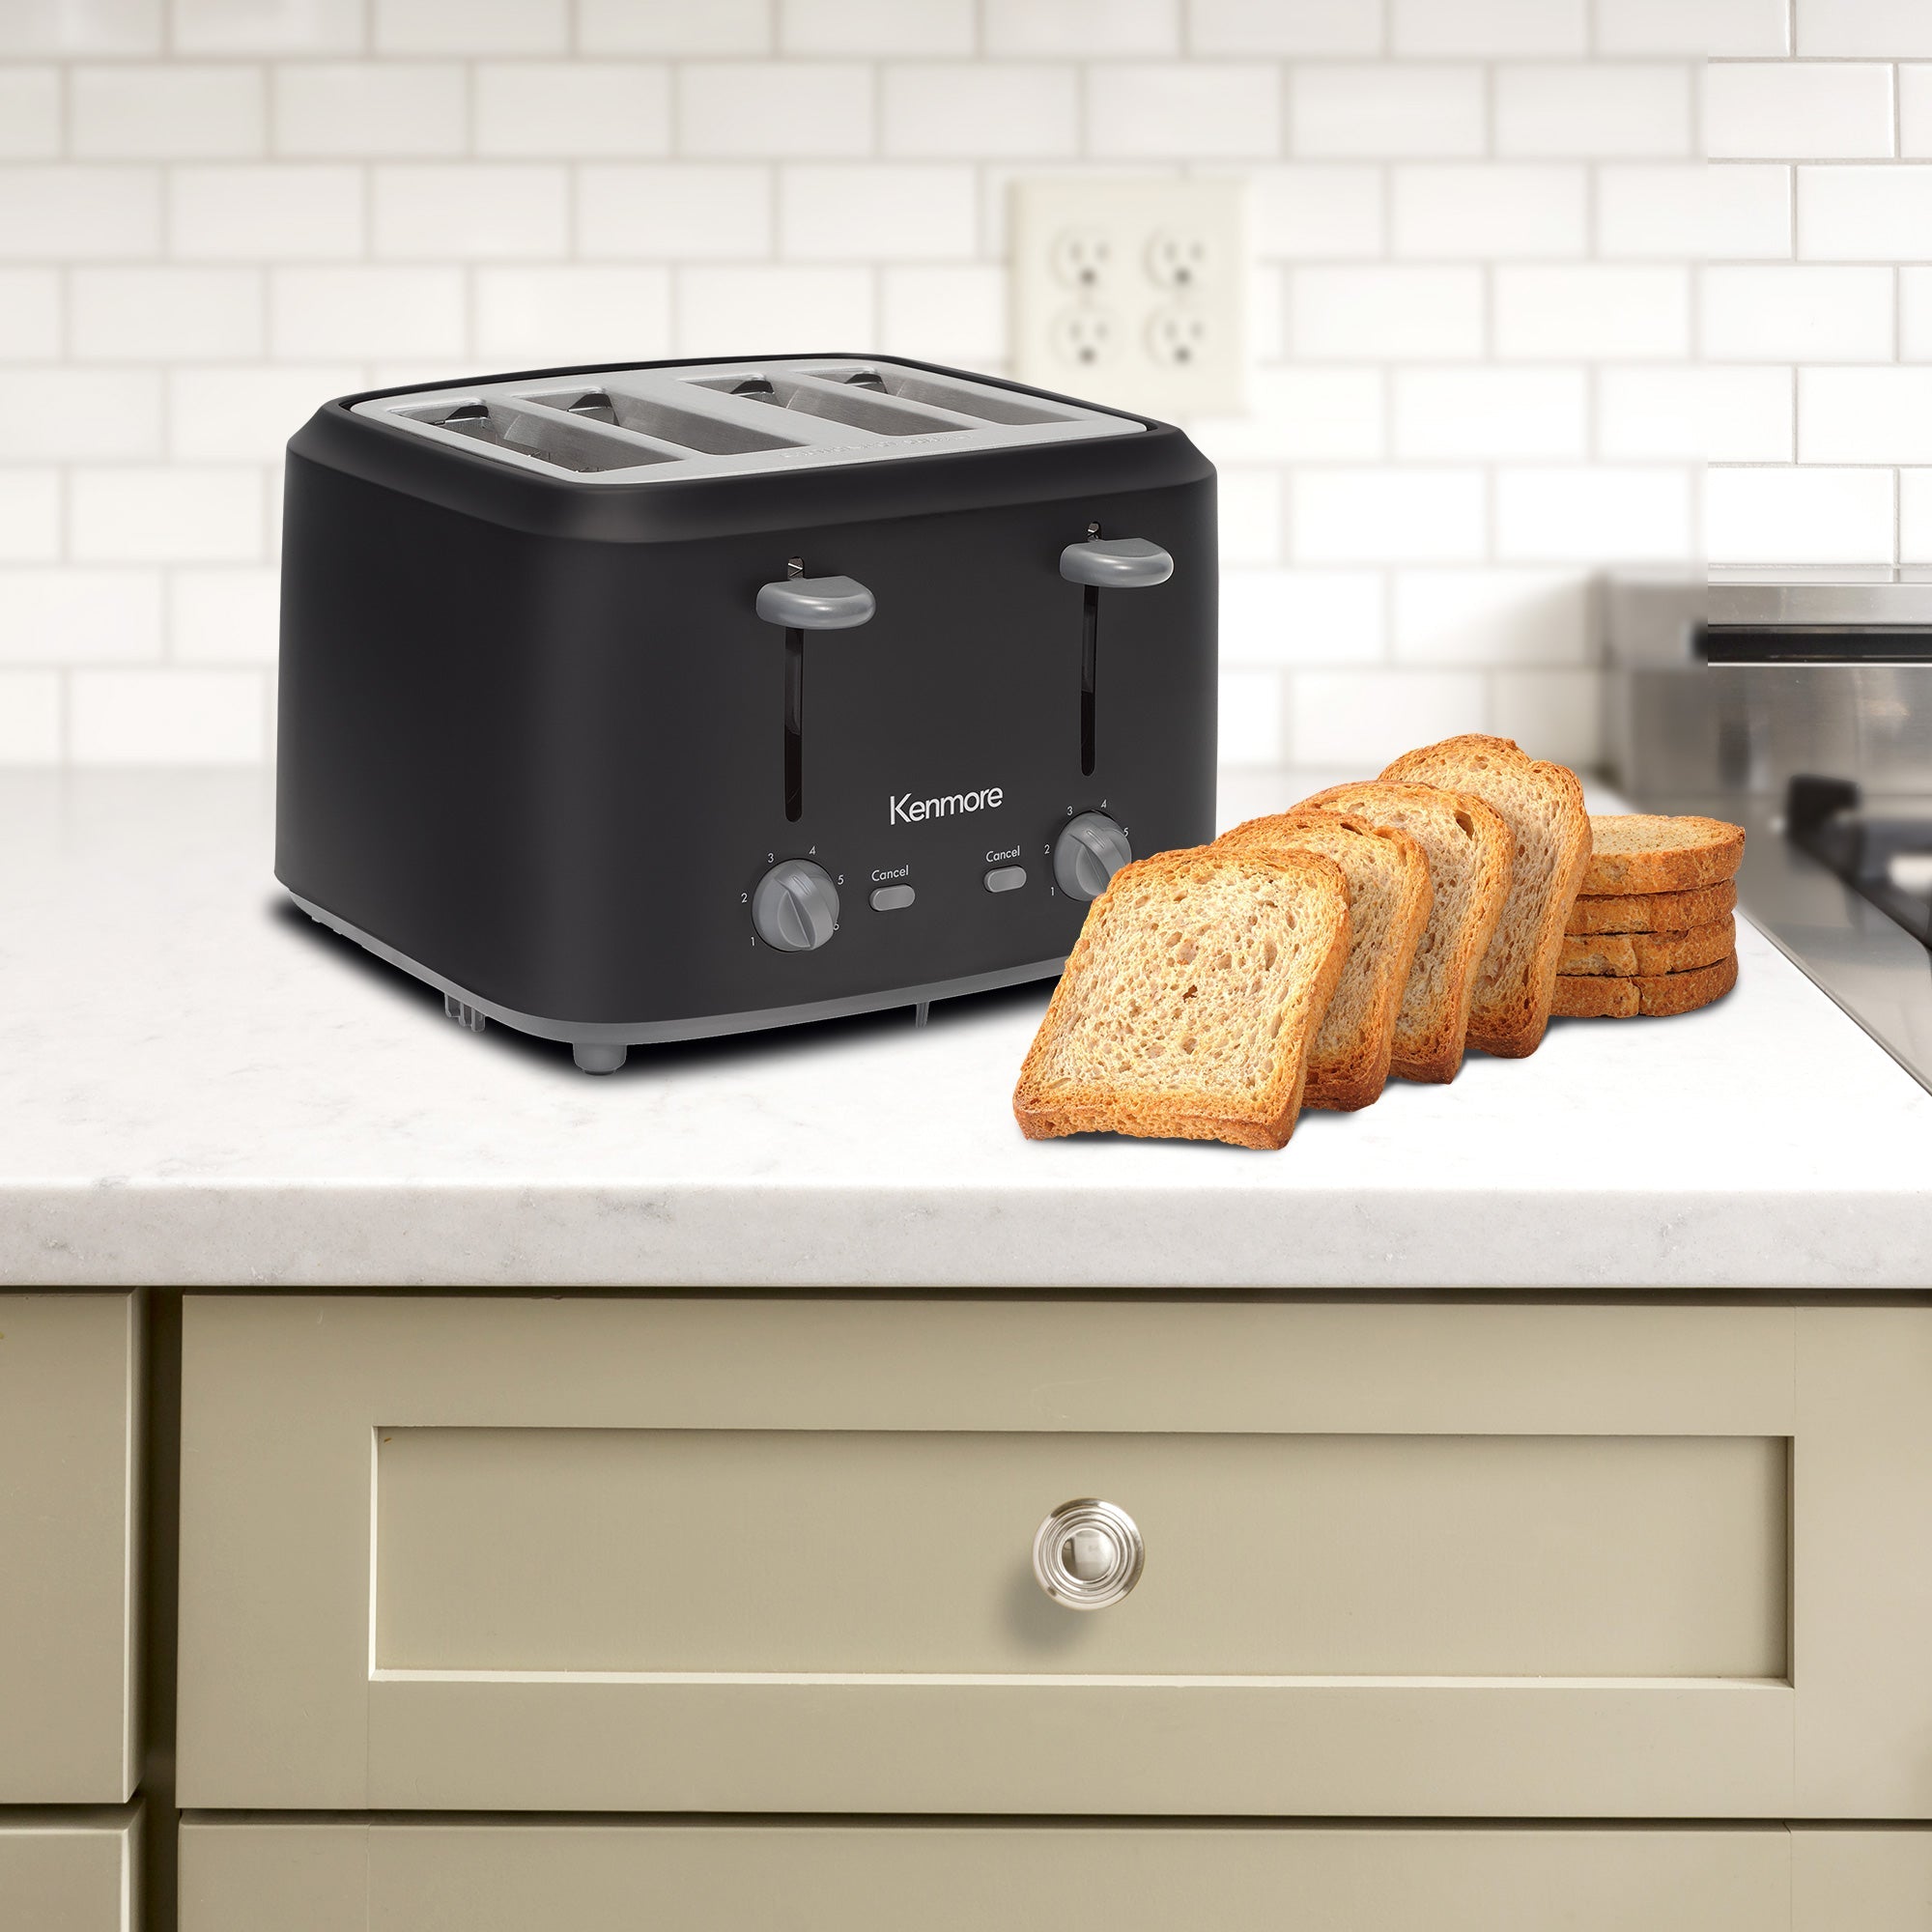 Lifestyle image of Kenmore OPP 4-slice matte black toaster on light gray countertop over a beige drawer with a white tiled backsplash behind and slices of bread in front